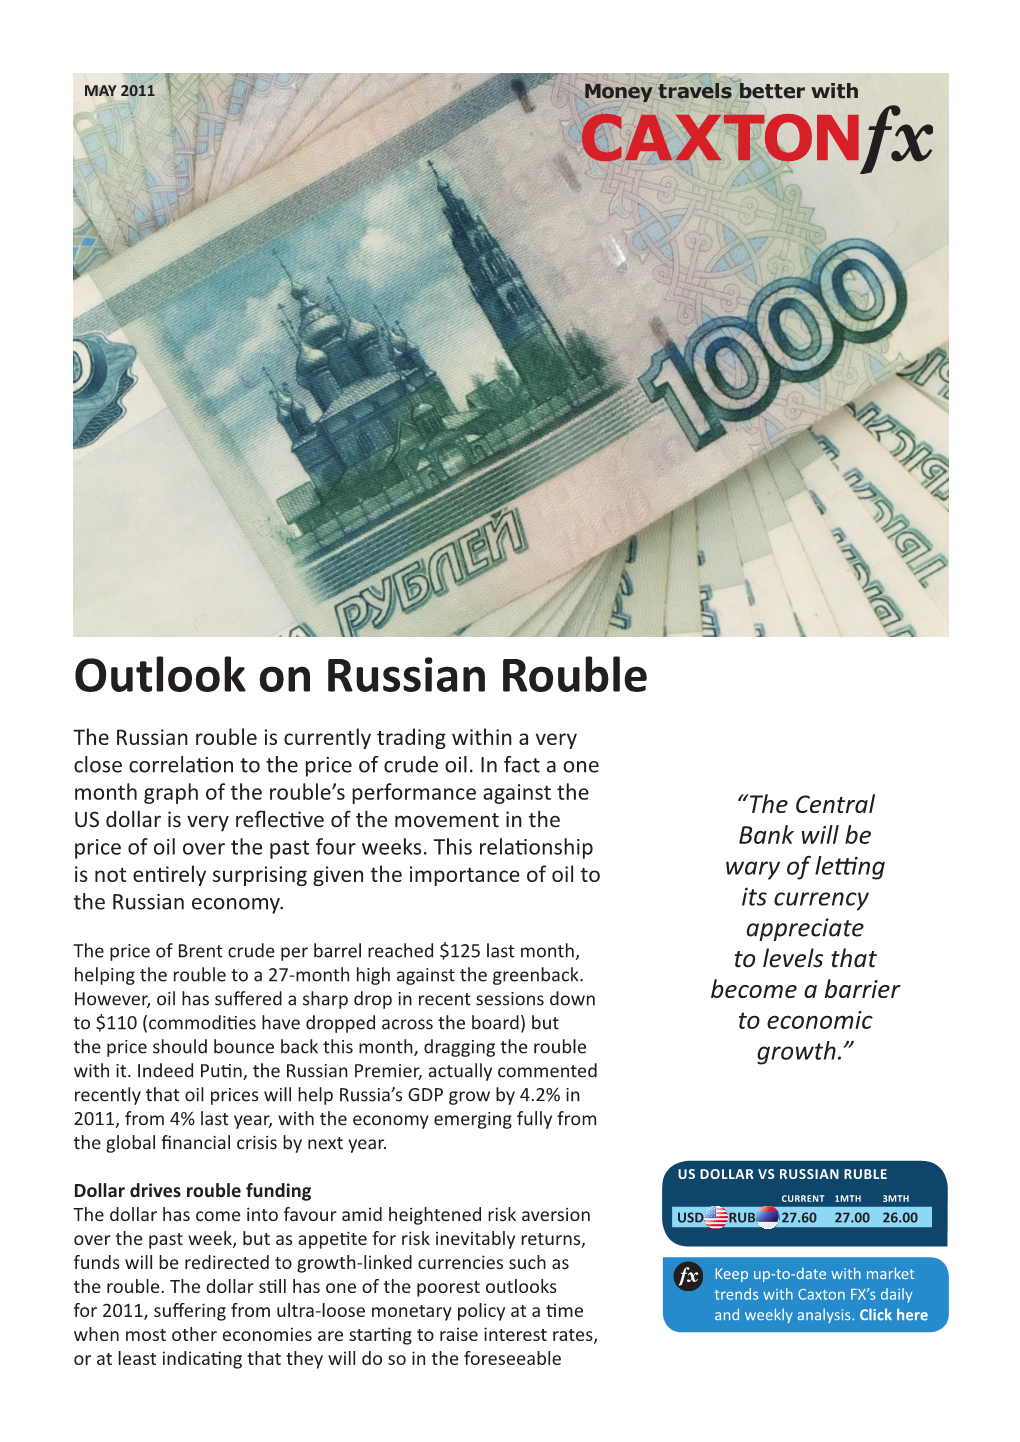 Outlook on Russian Rouble